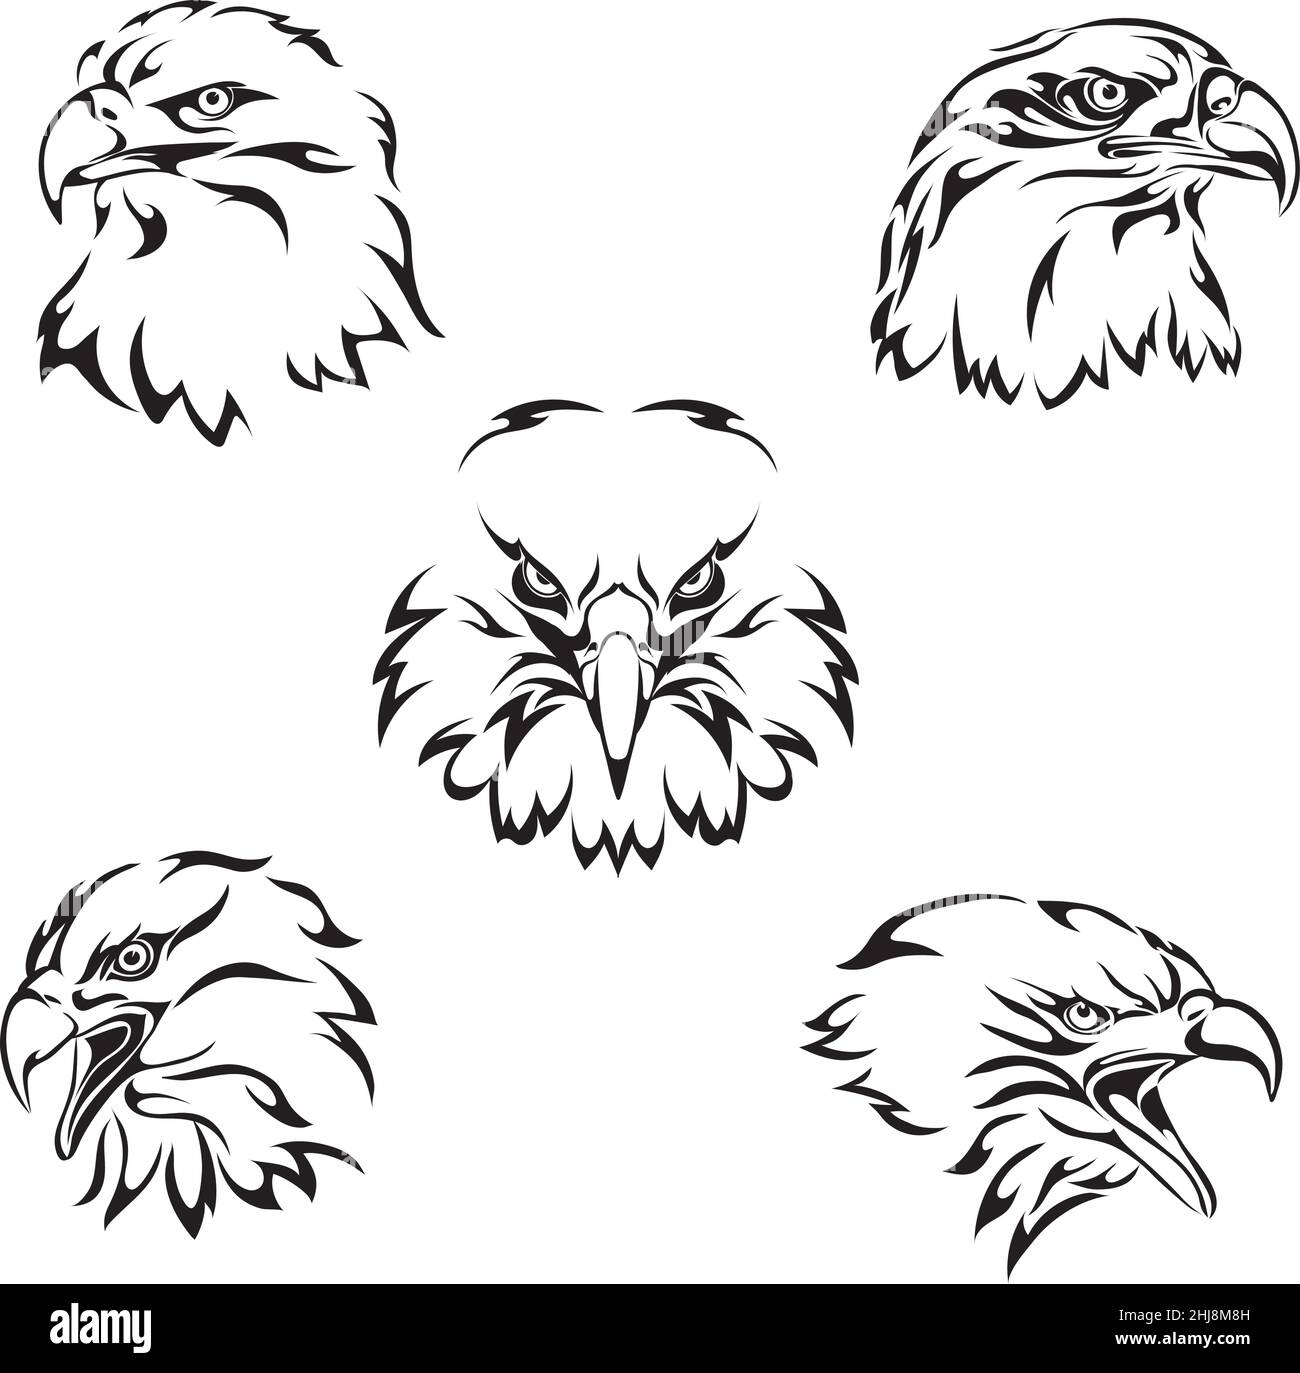 eagle, logo, soaring eagle, bird, portrait, vector, image, isolated, sign for companies, sports team Stock Vector